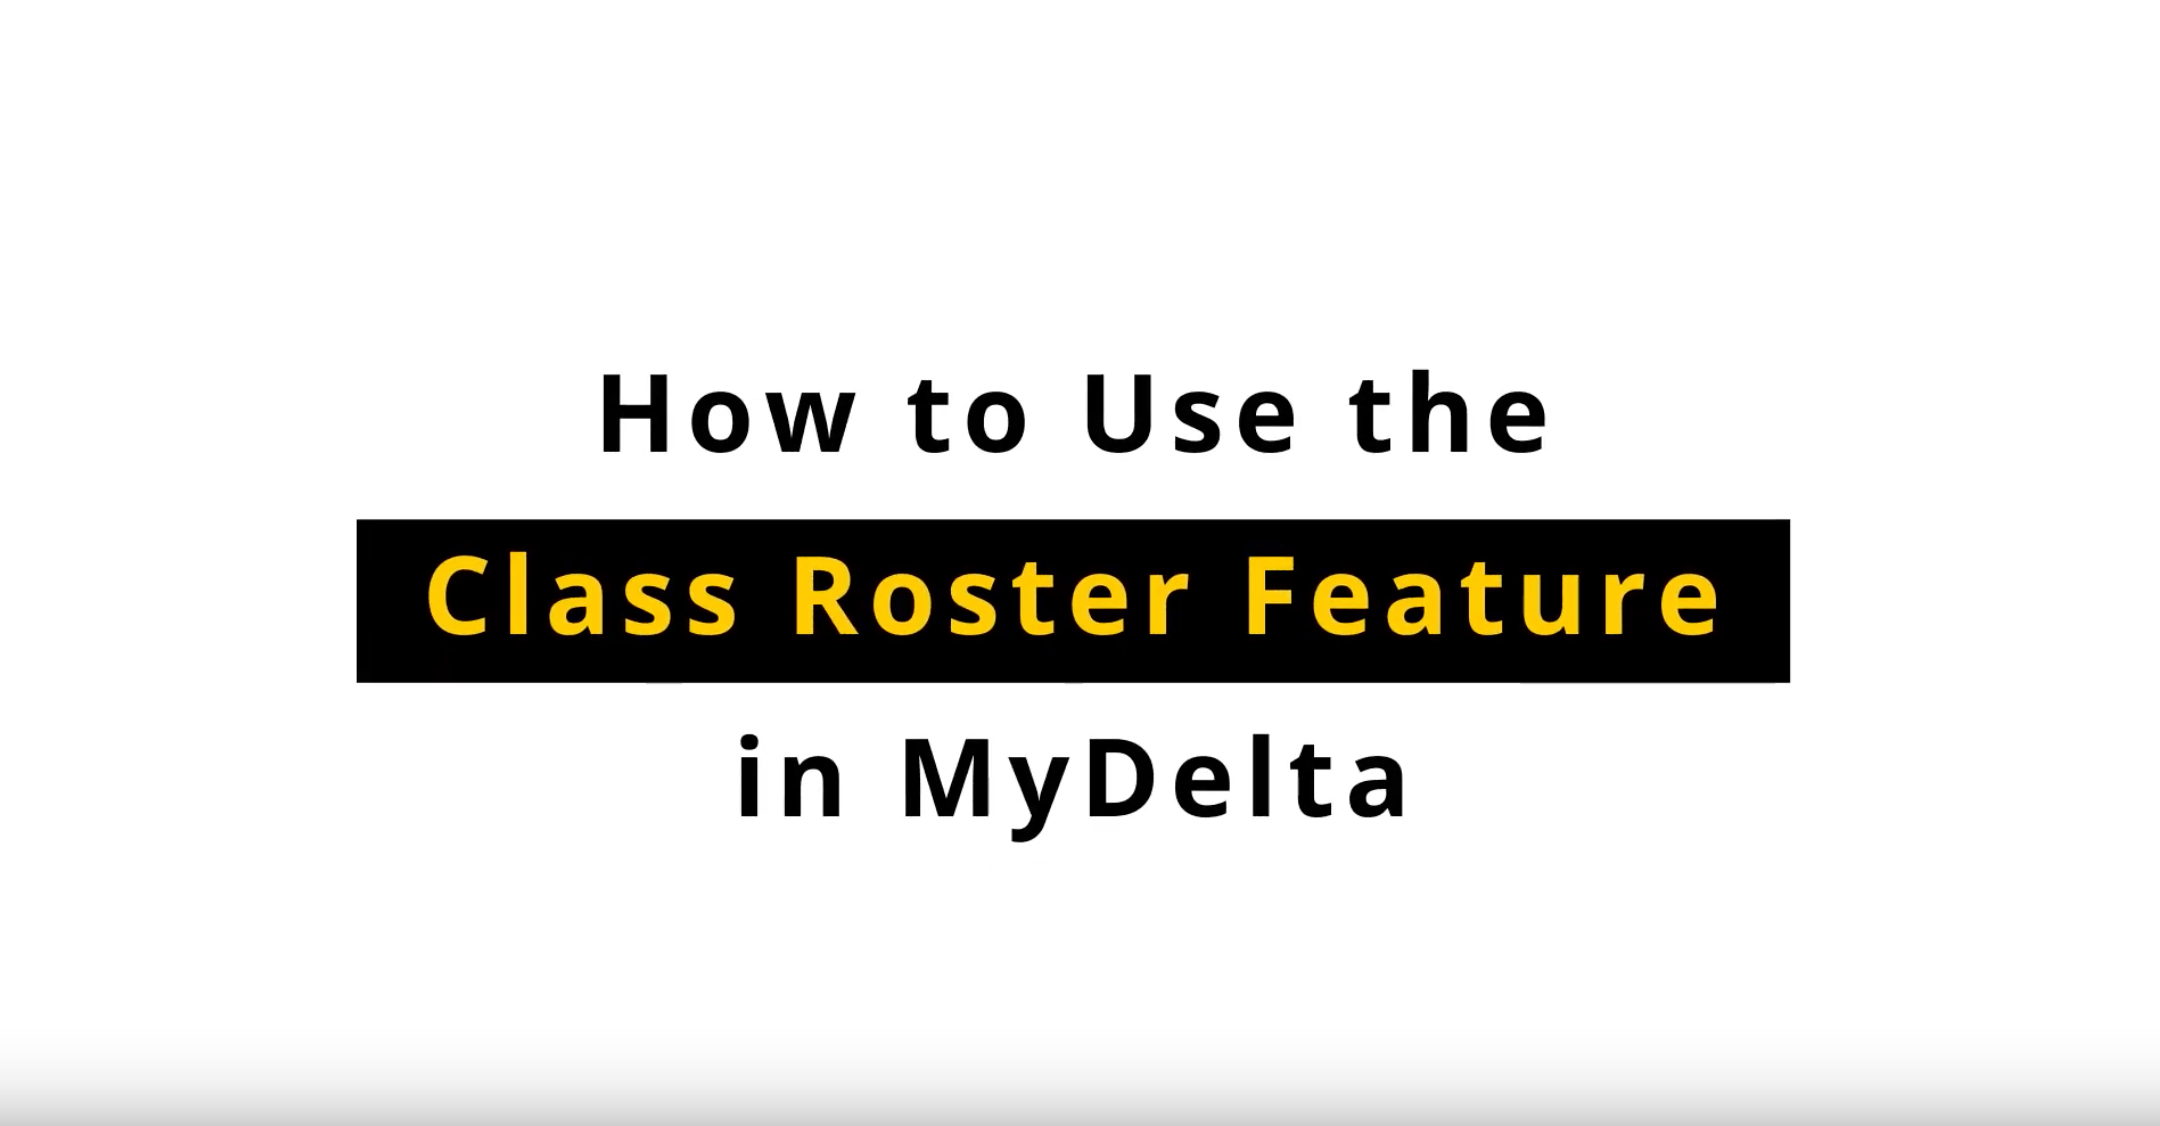 How to Use the Class Roster Feature in MyDelta